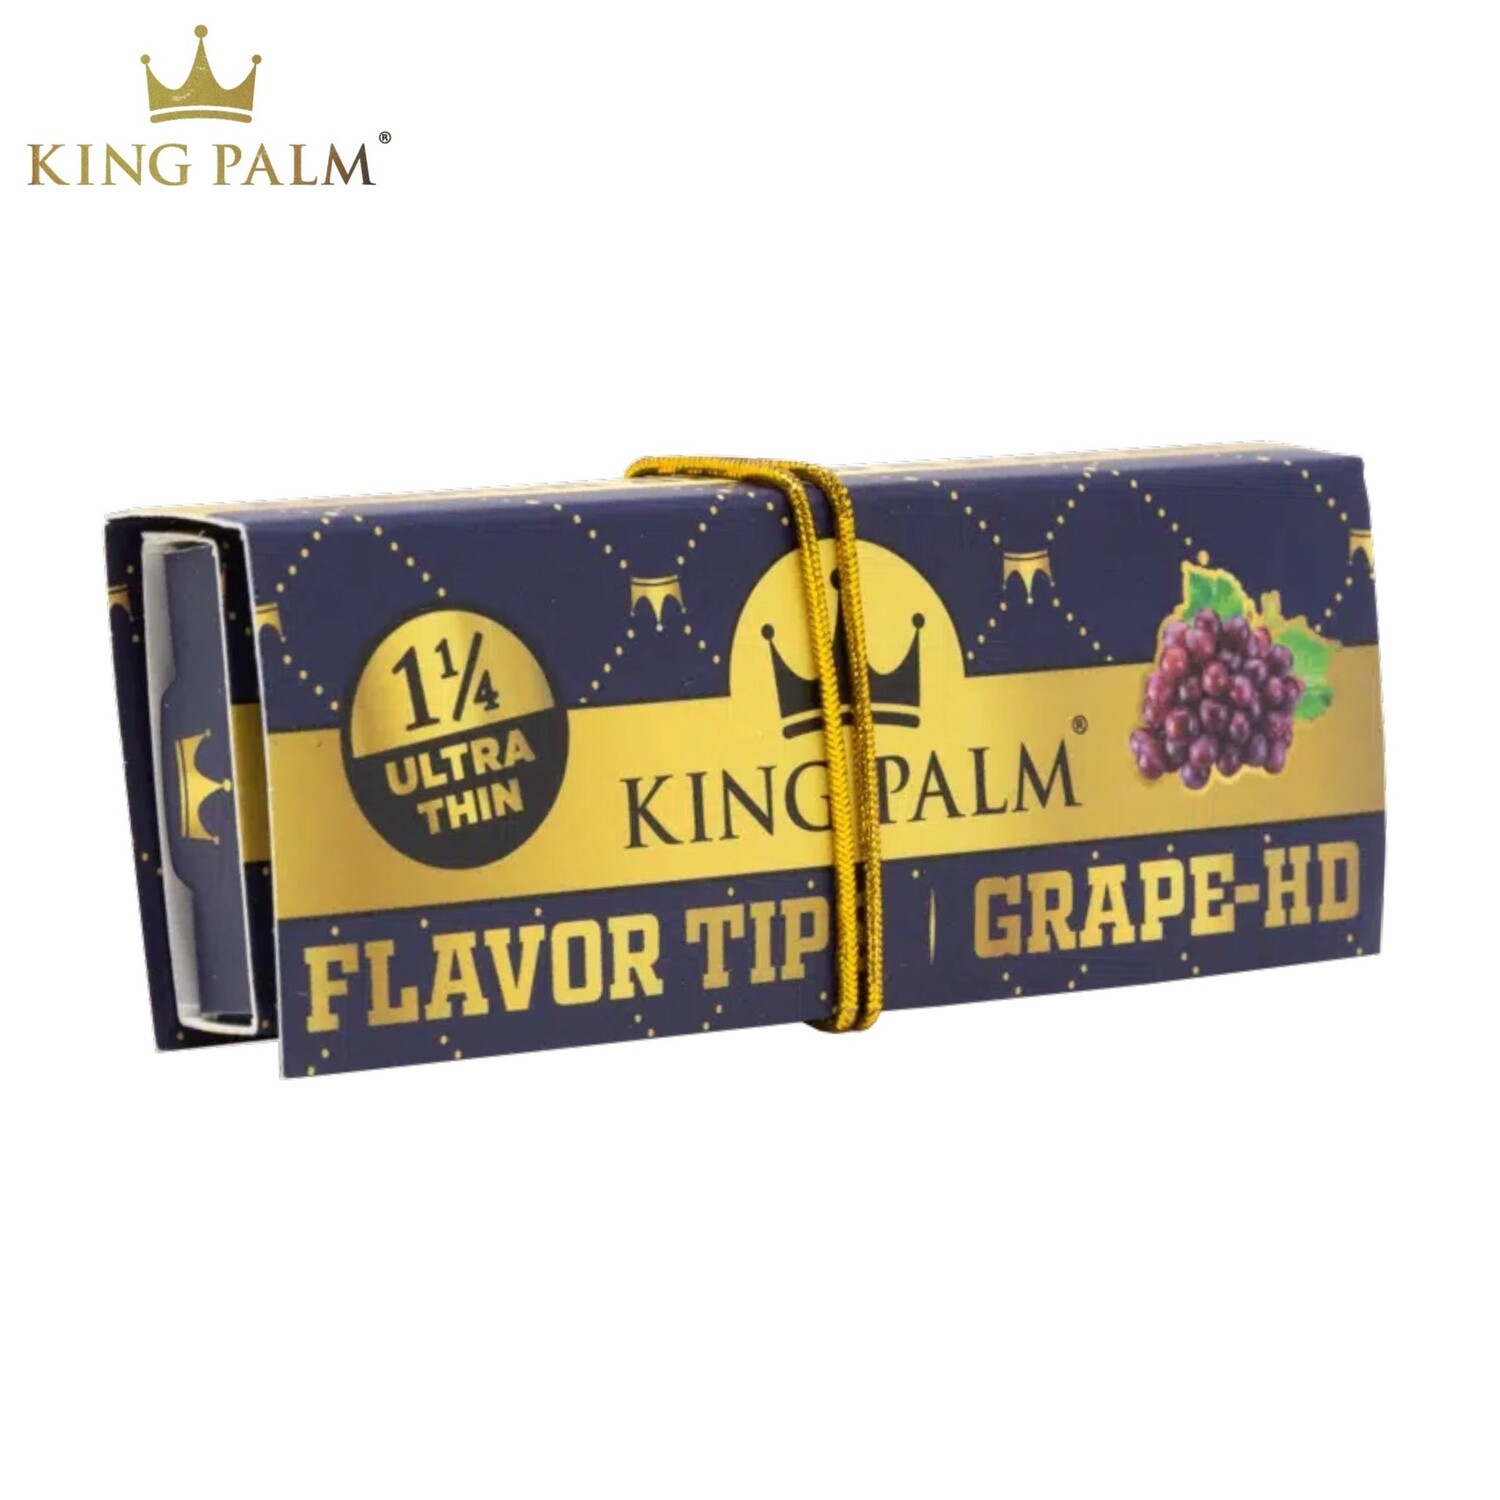 King Palm® Rolling Papers + Flavored Tips (1 ¼")